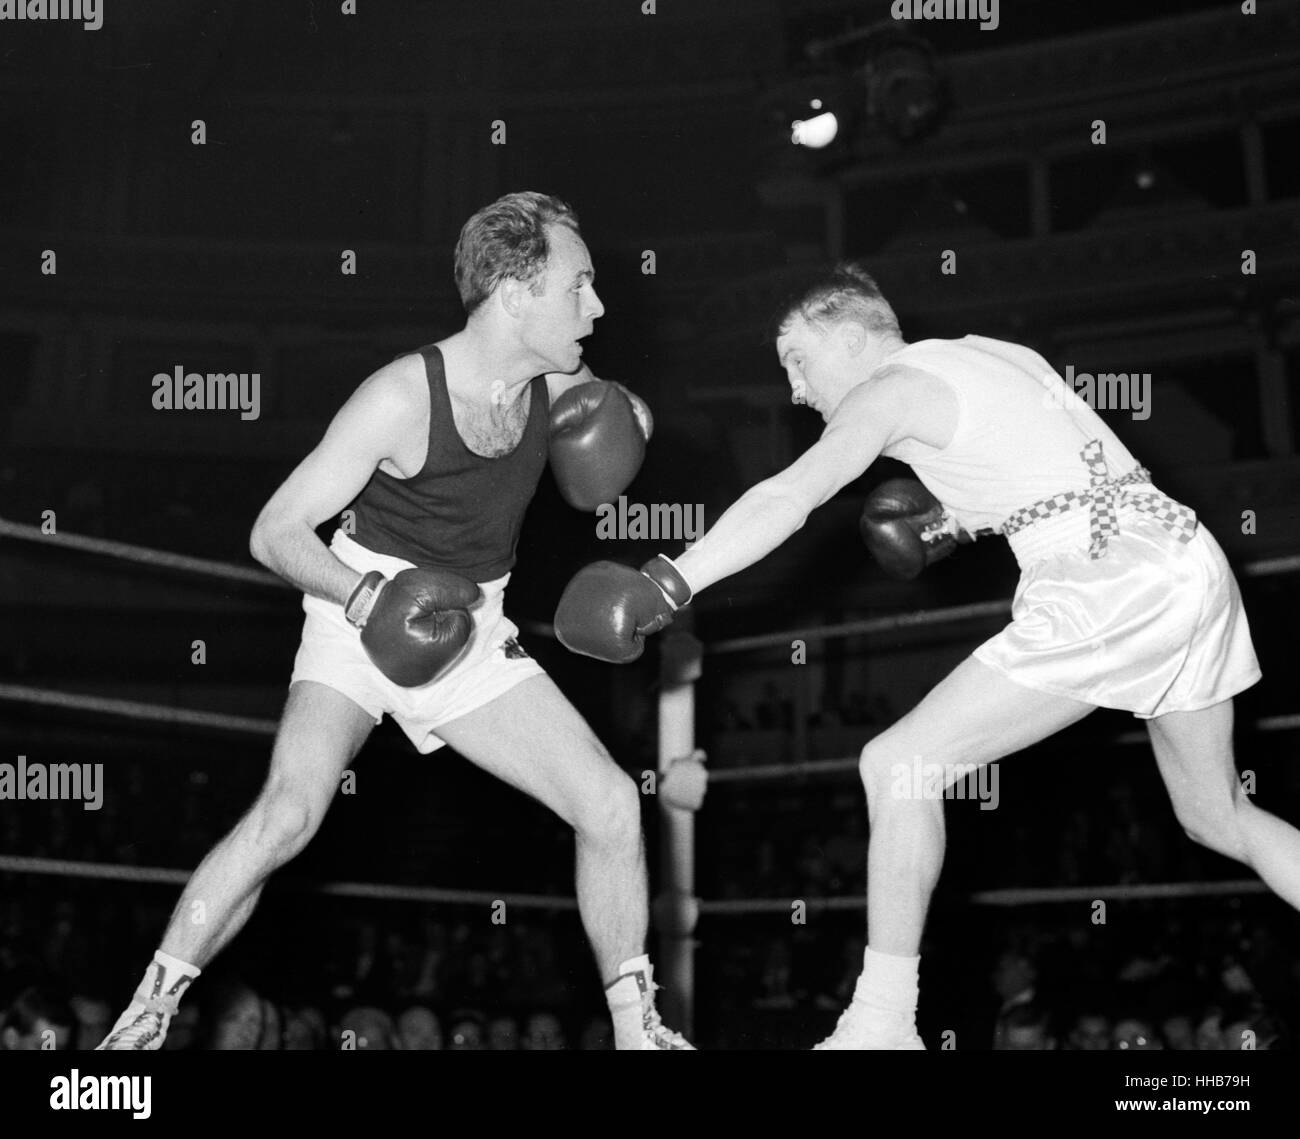 R Russell (right) of Hull Boys' Club forces Manfred Mae (Berlin) to retreat in their featherweight bout in the international amateur boxing match between England and West Germany at the Royal Albert Hall, London. Mae won, the referee stopping the fight in the second round because of  a cut eye sustained by Russell. Stock Photo